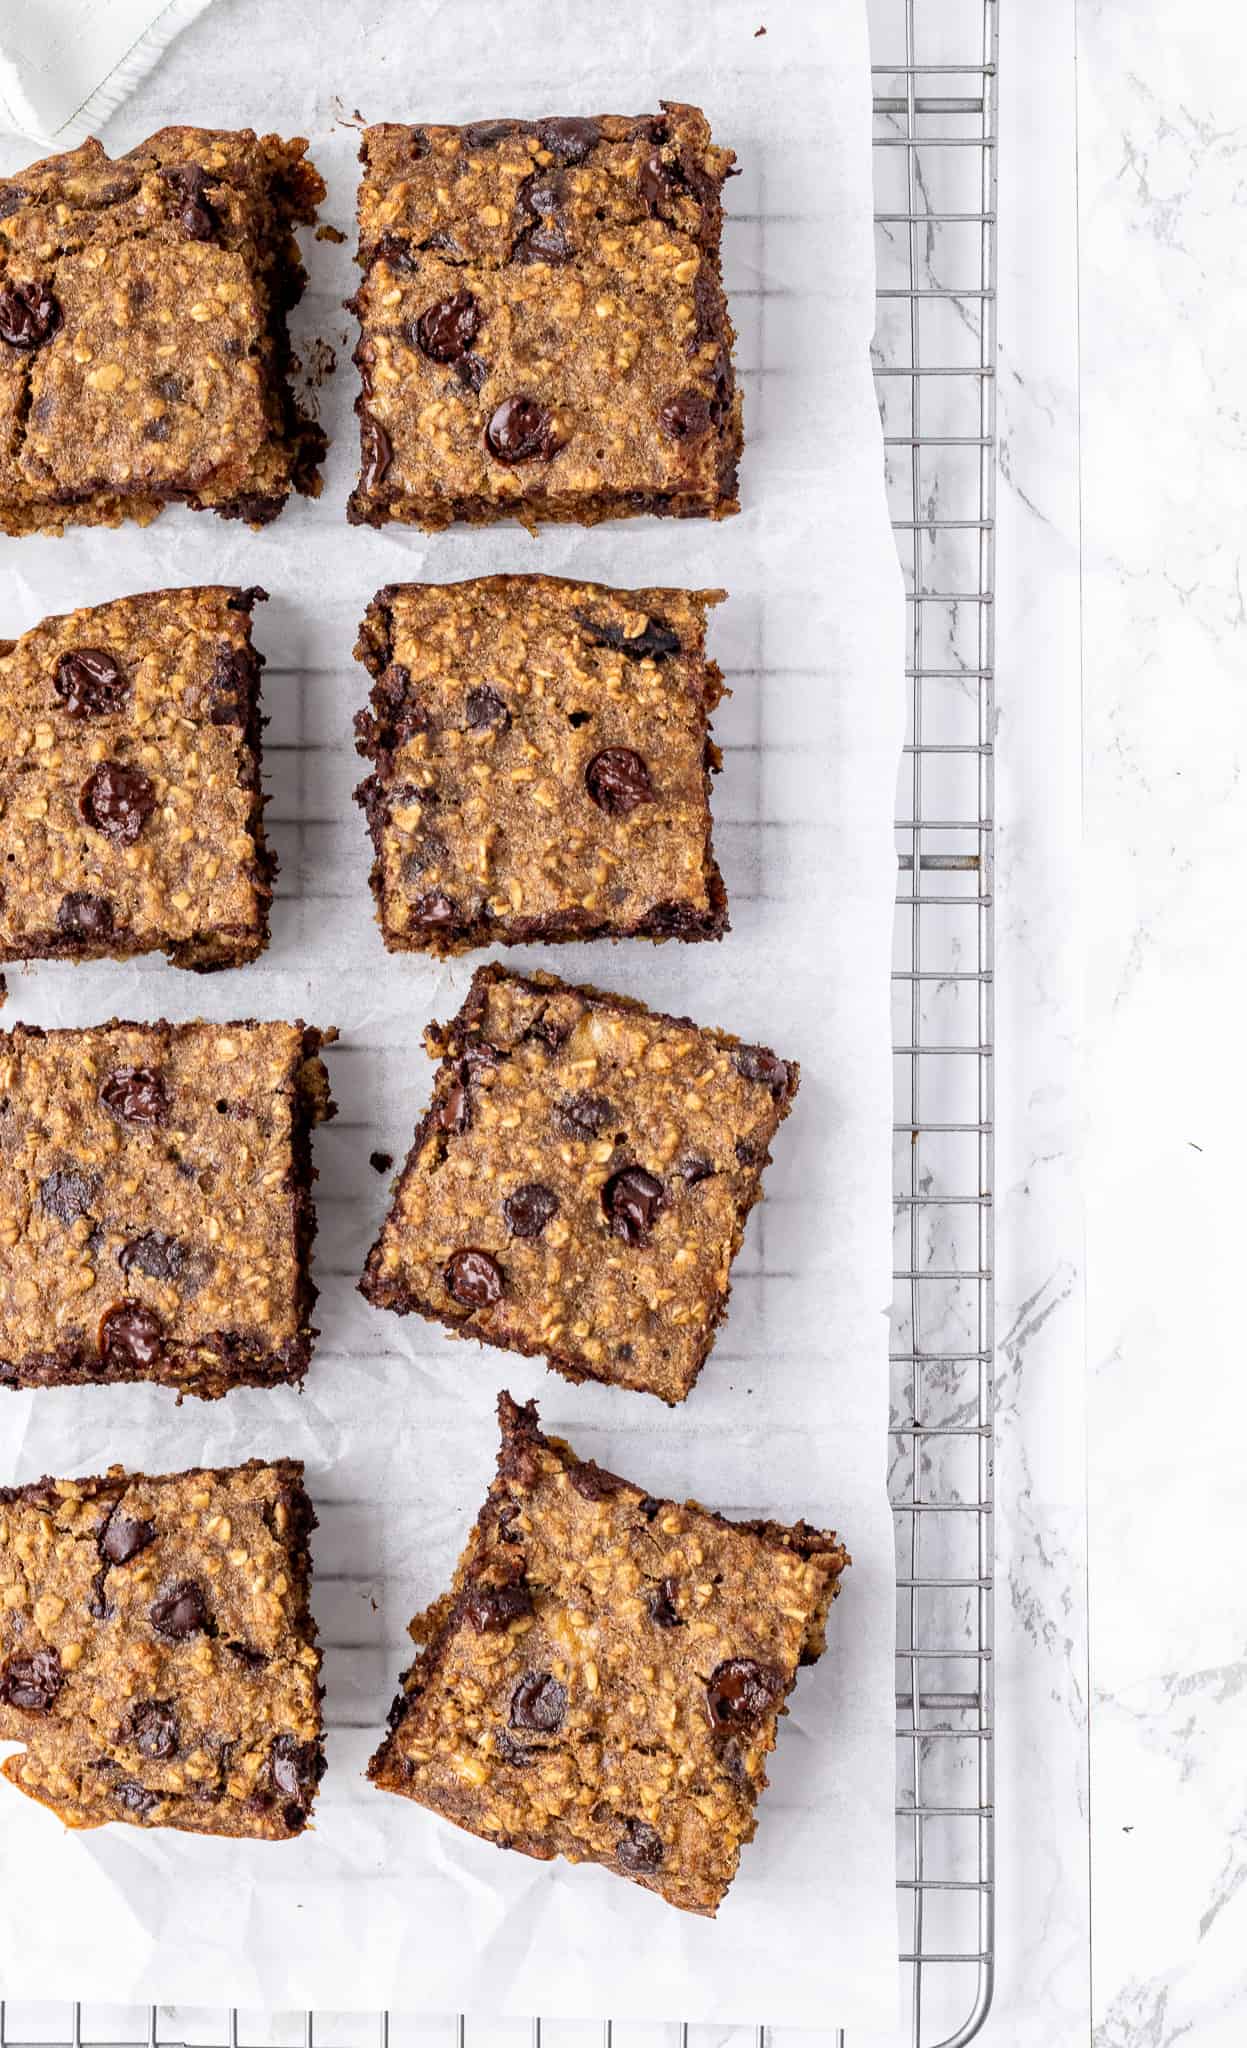 Oatmeal bars cut into squares on a cooling rack.